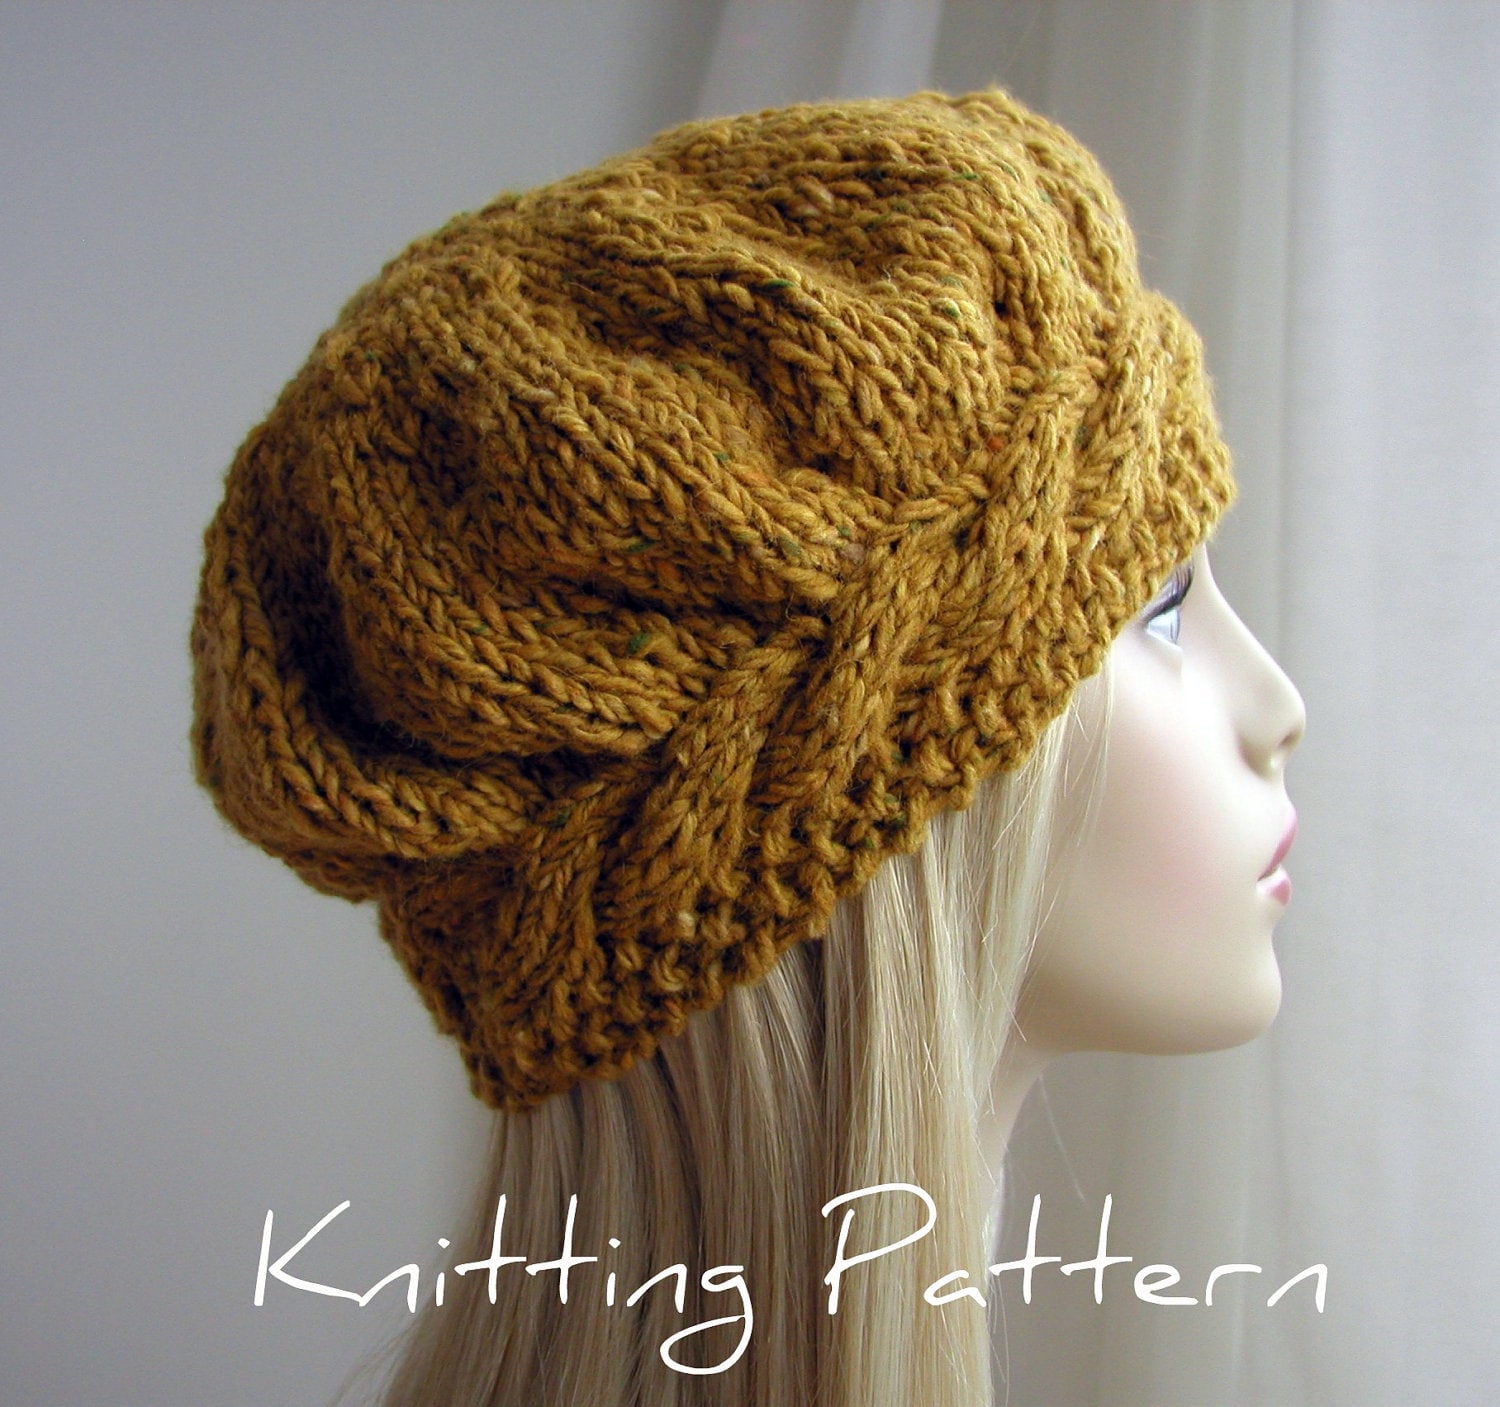 Free, Printable Knitted Beret Patterns - Yahoo! Voices - voices